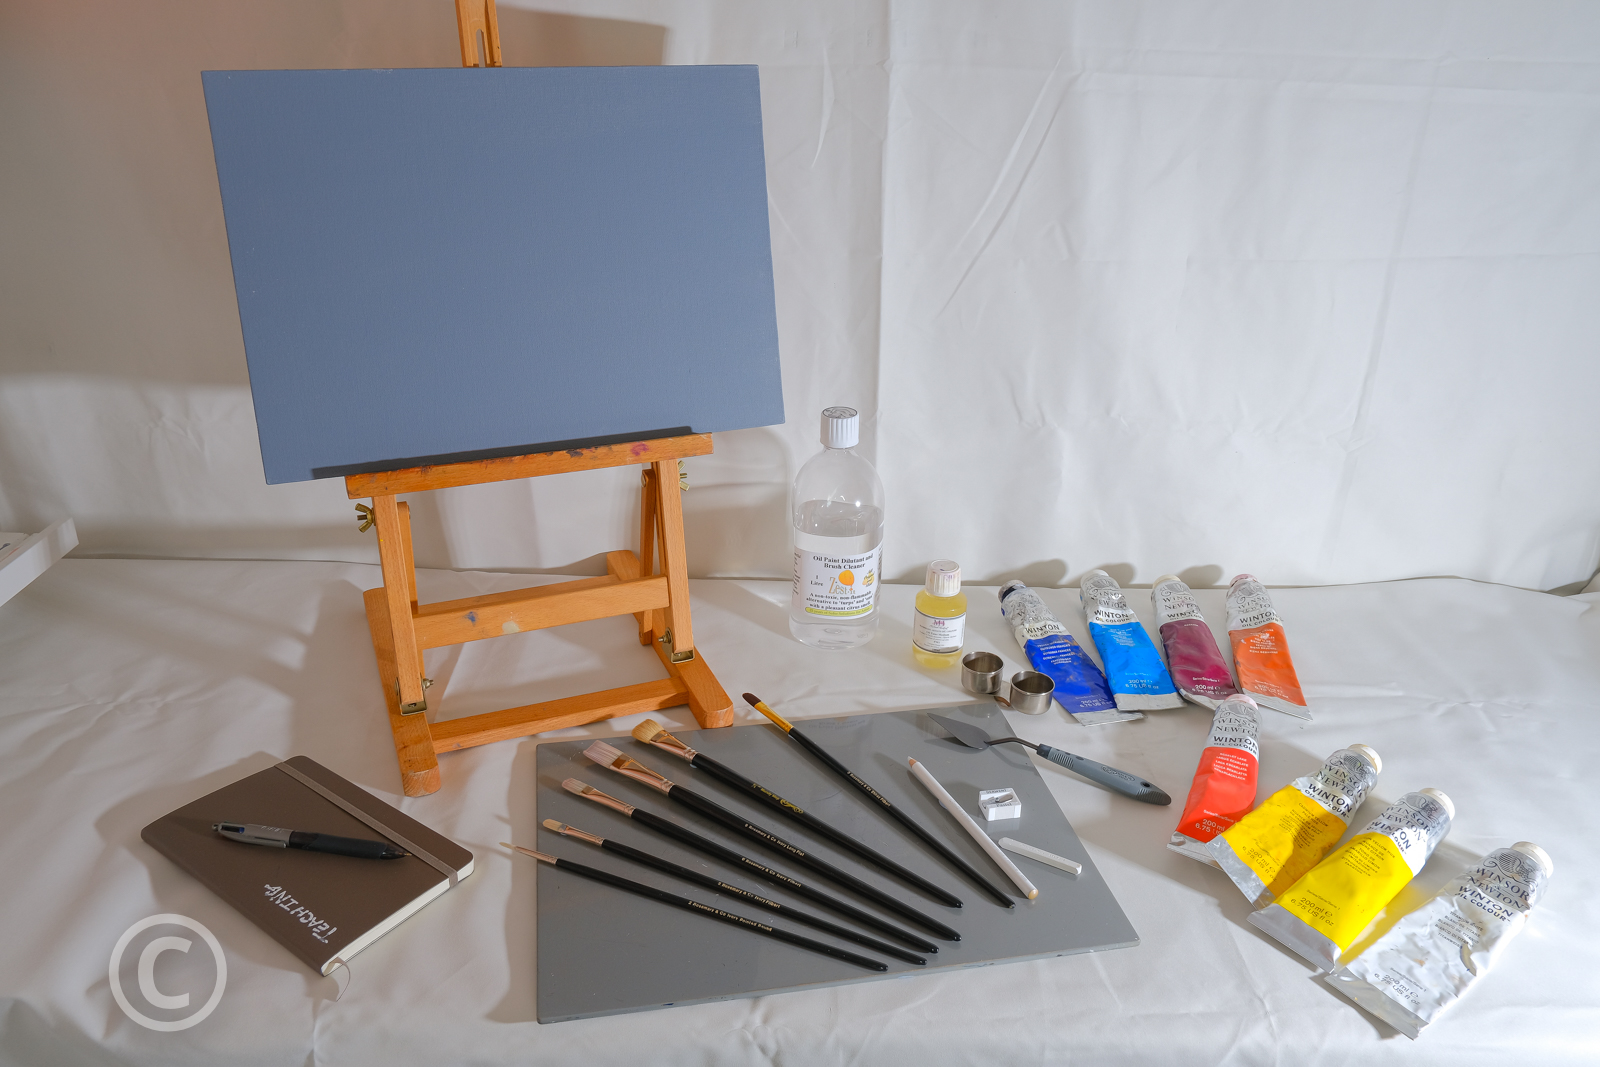 Oil Painting Supplies For Beginners: What You Need To Oil Paint